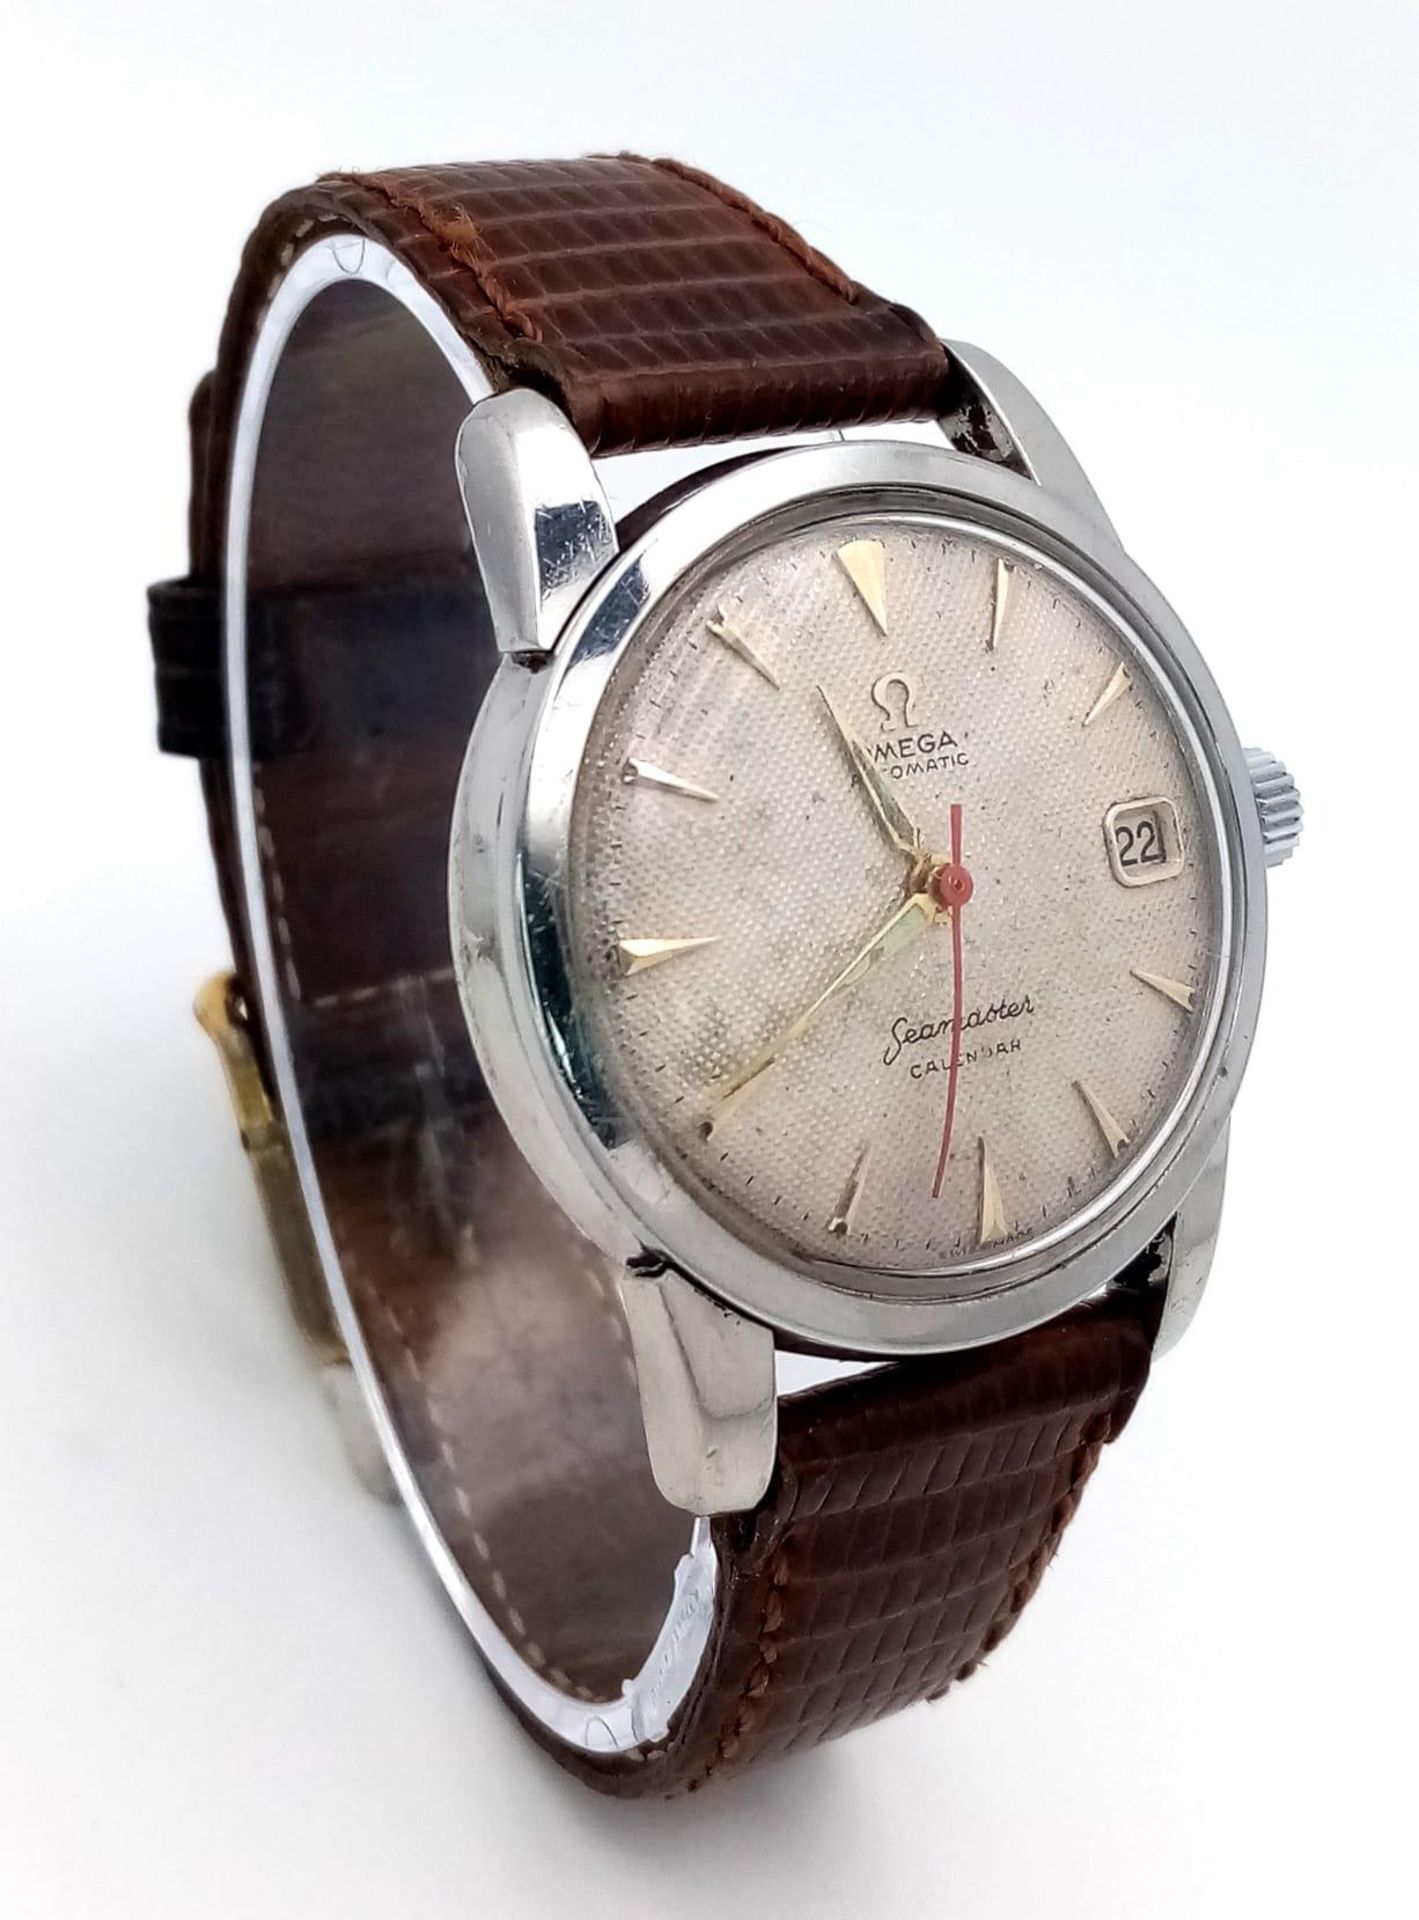 A Vintage Omega Seamaster Calendar Gents Watch. Brown leather strap. Stainless steel case - 33mm. - Image 2 of 8